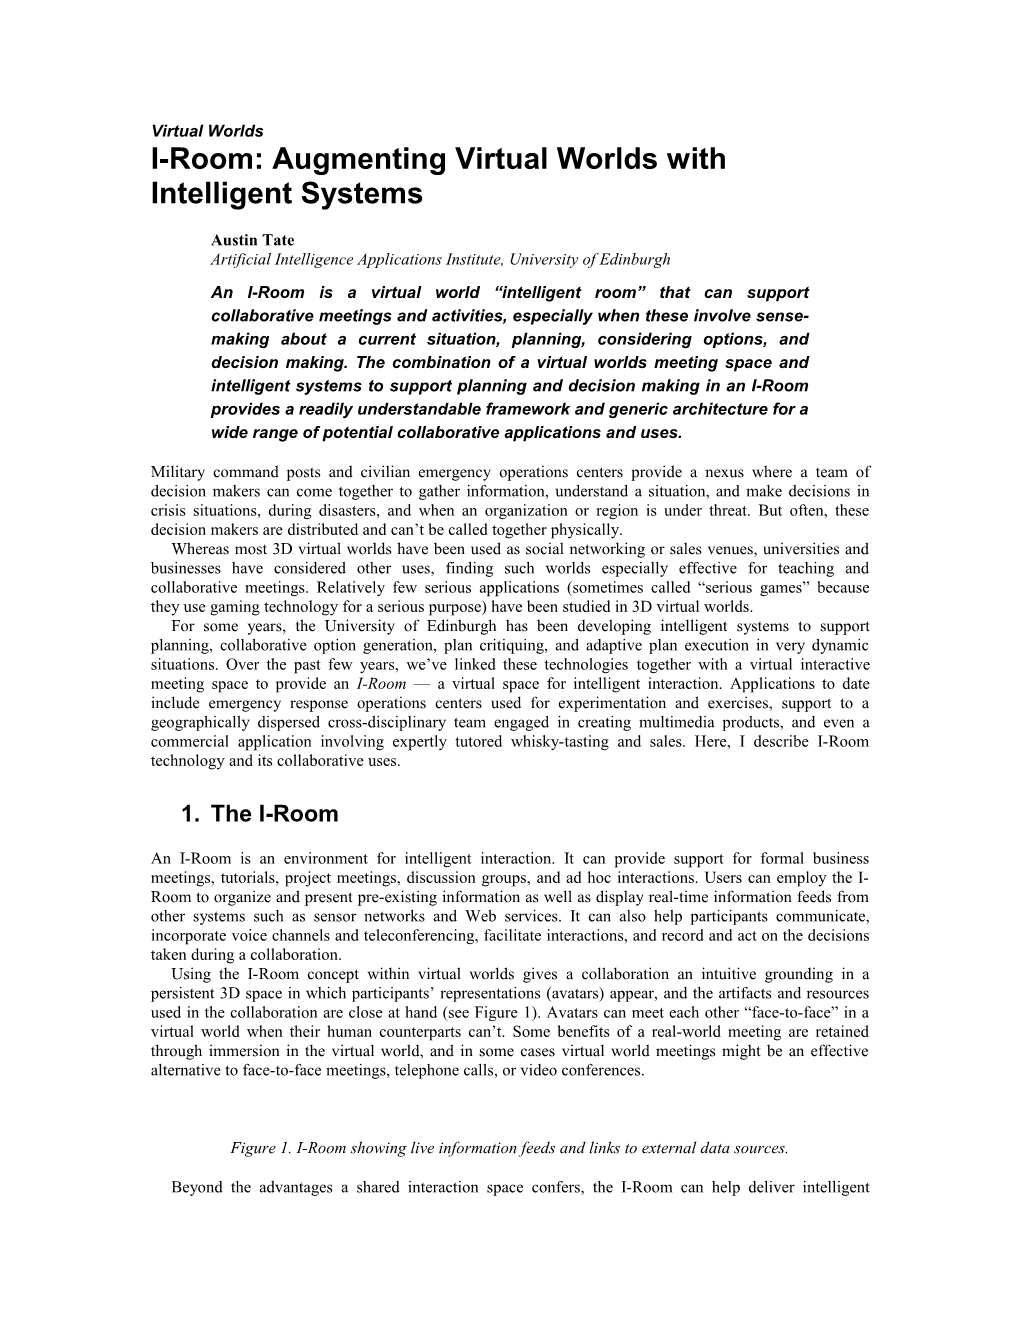 I-Room: Augmenting Virtual Worlds with Intelligent Systems